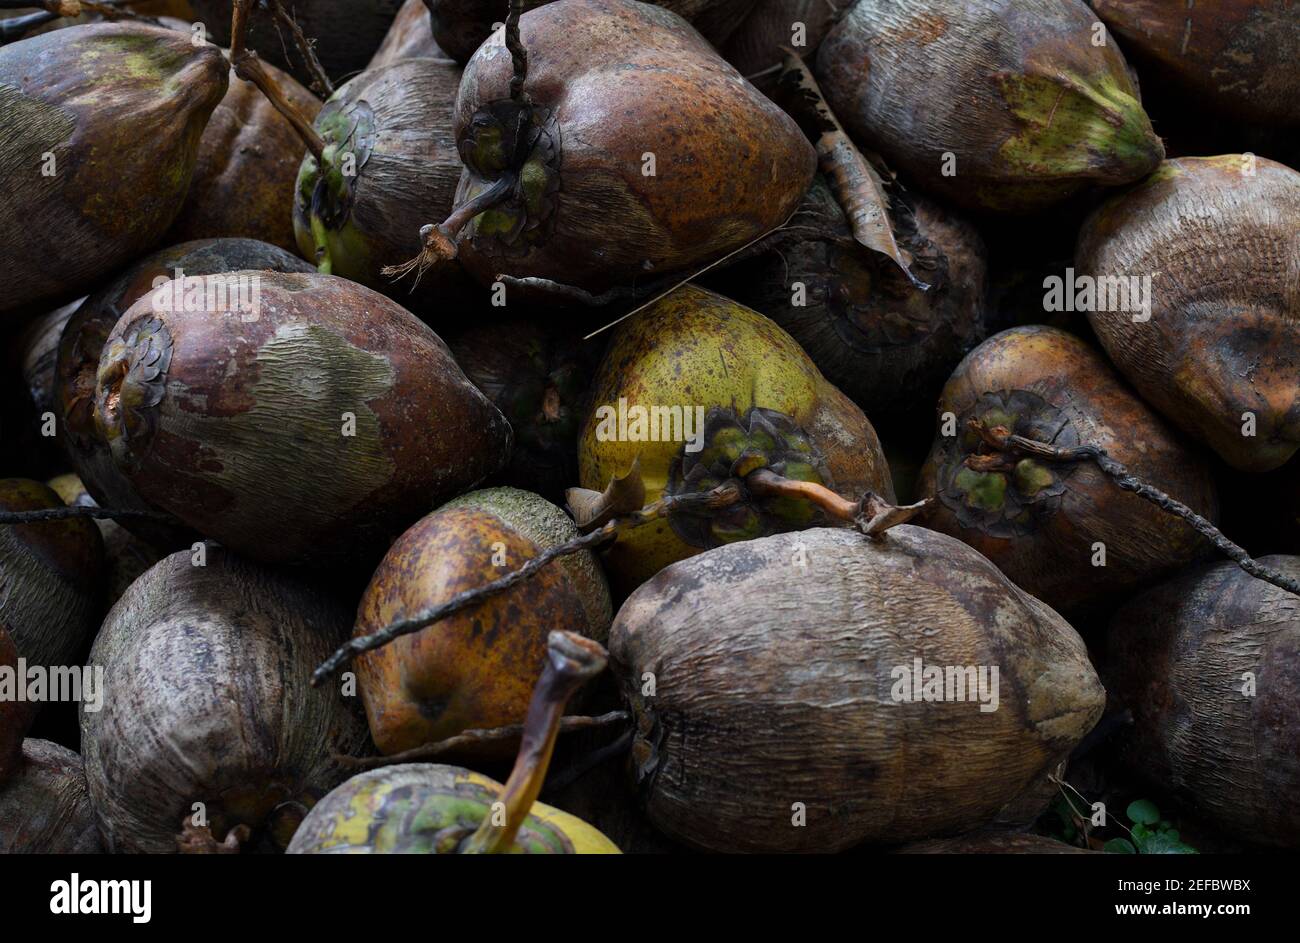 coconuts stalked on ground for drying Stock Photo